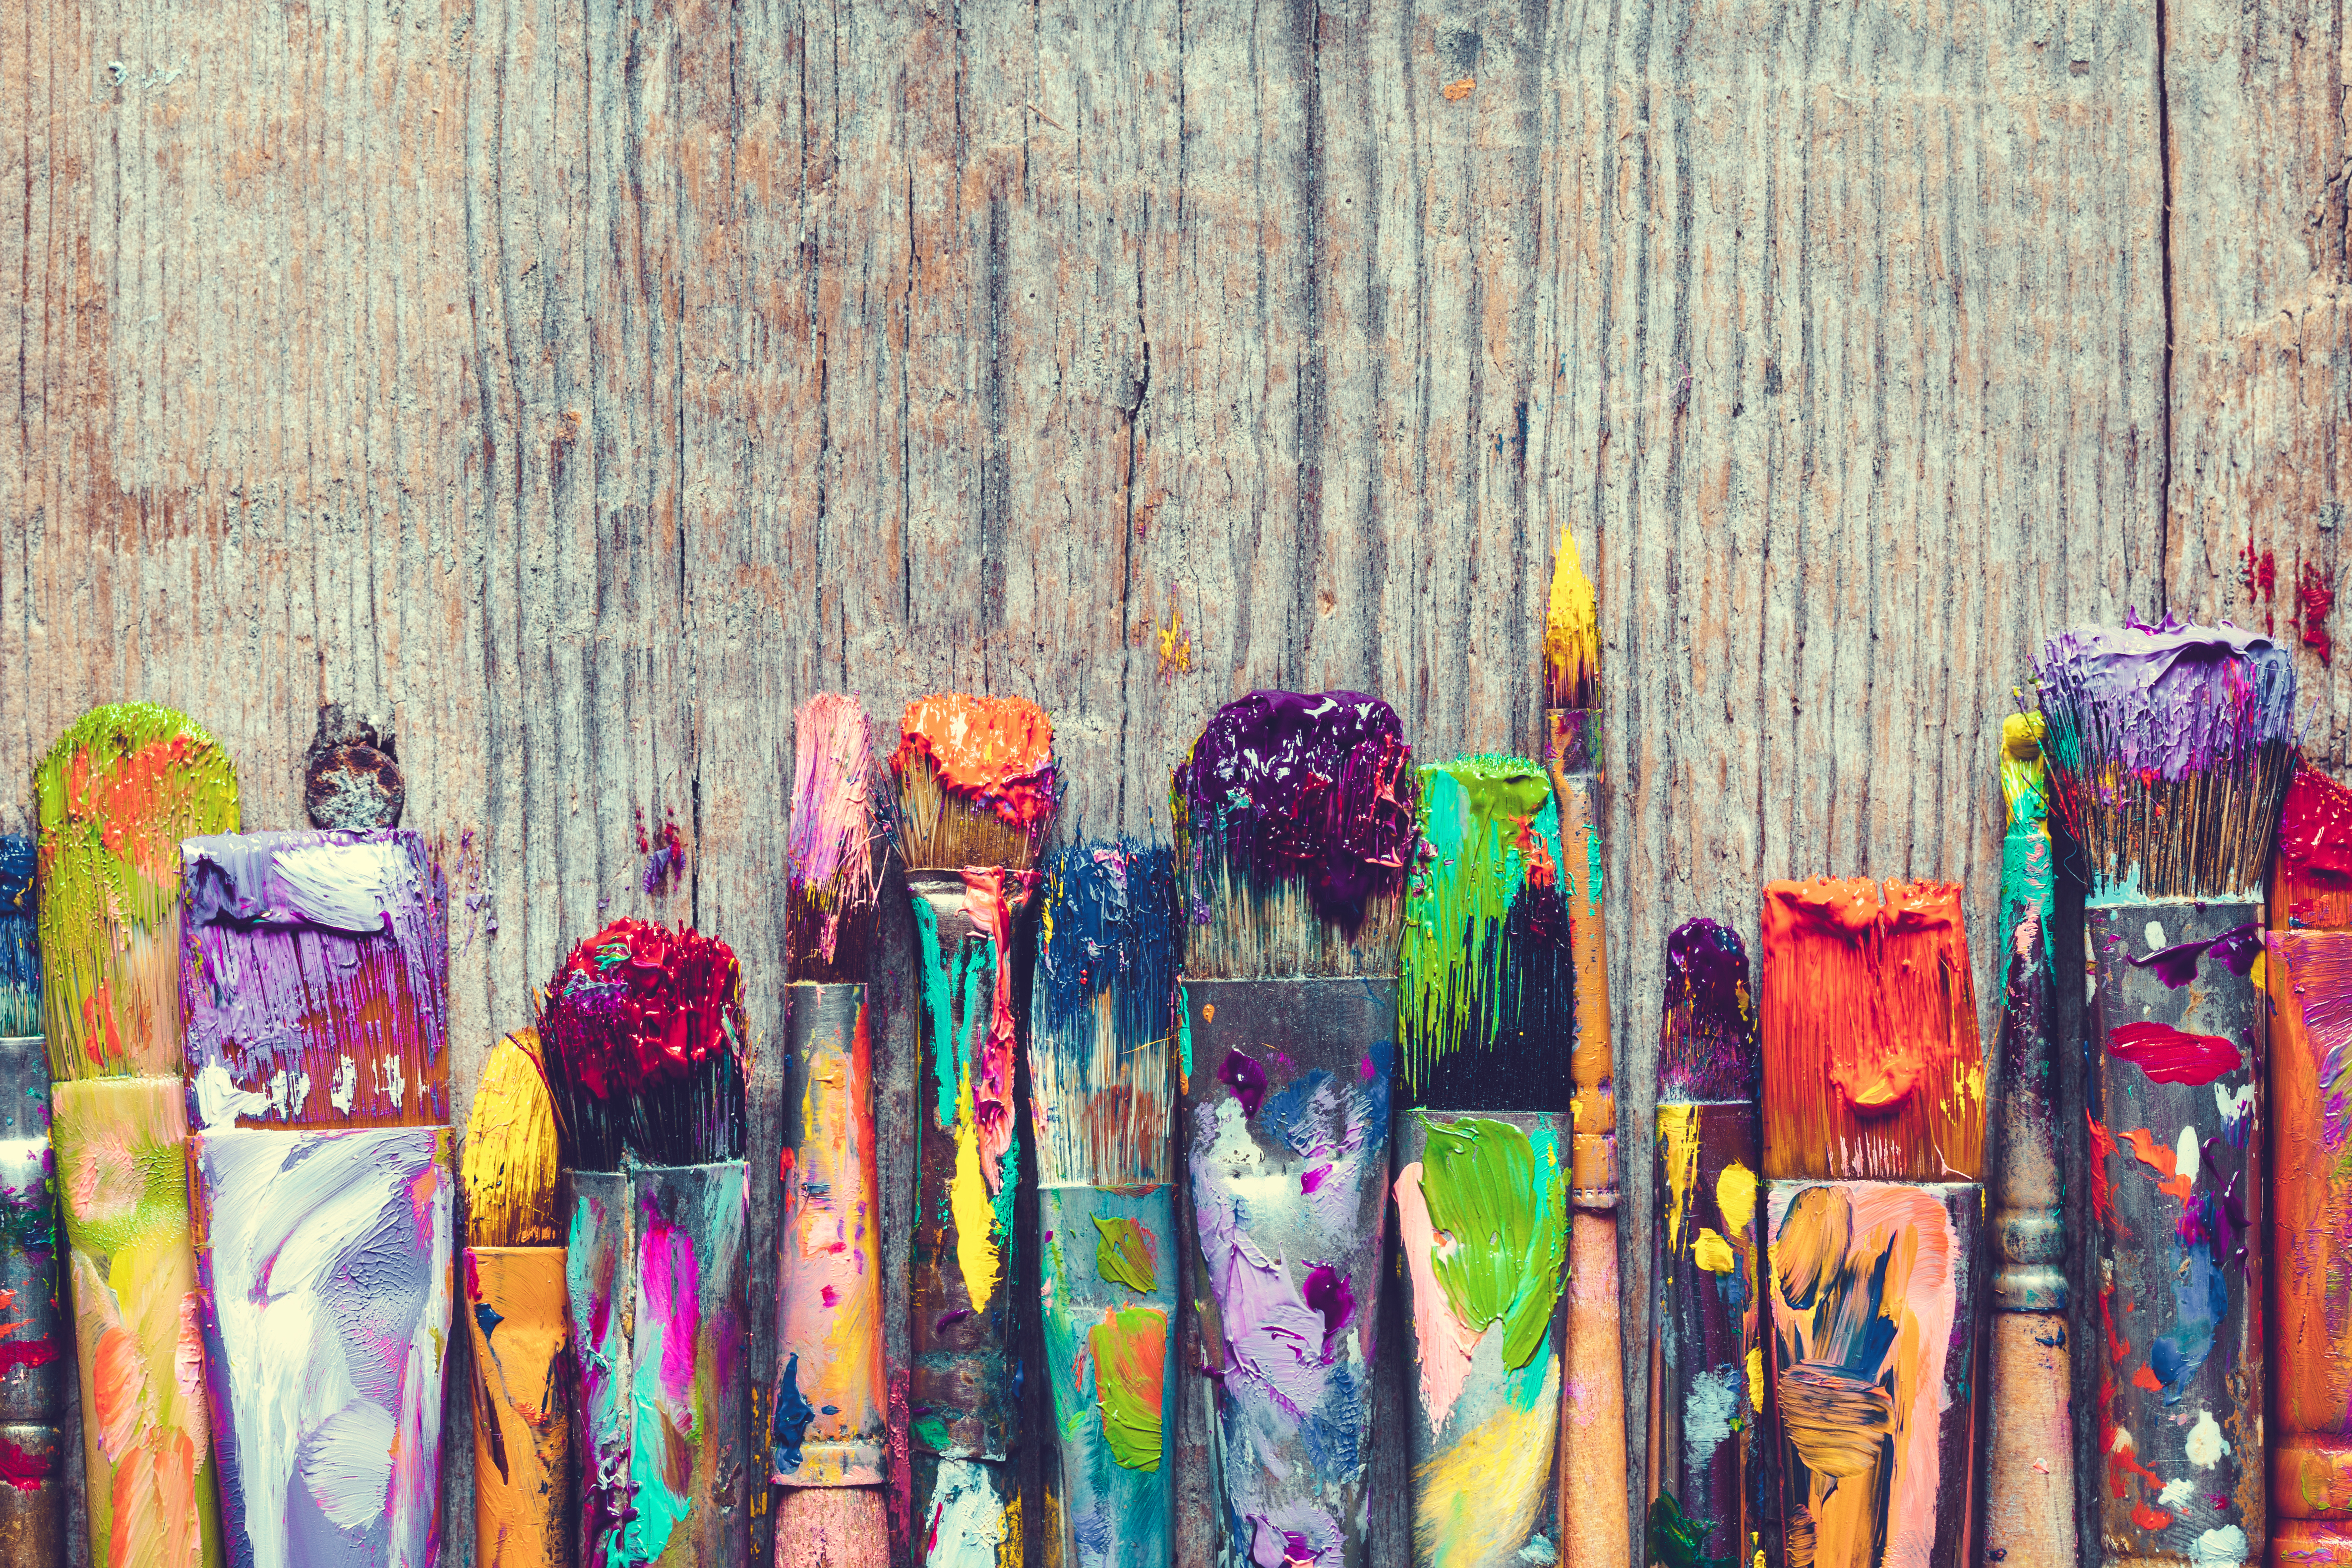 Our Customers’ Top 10 Favourite Art Supplies